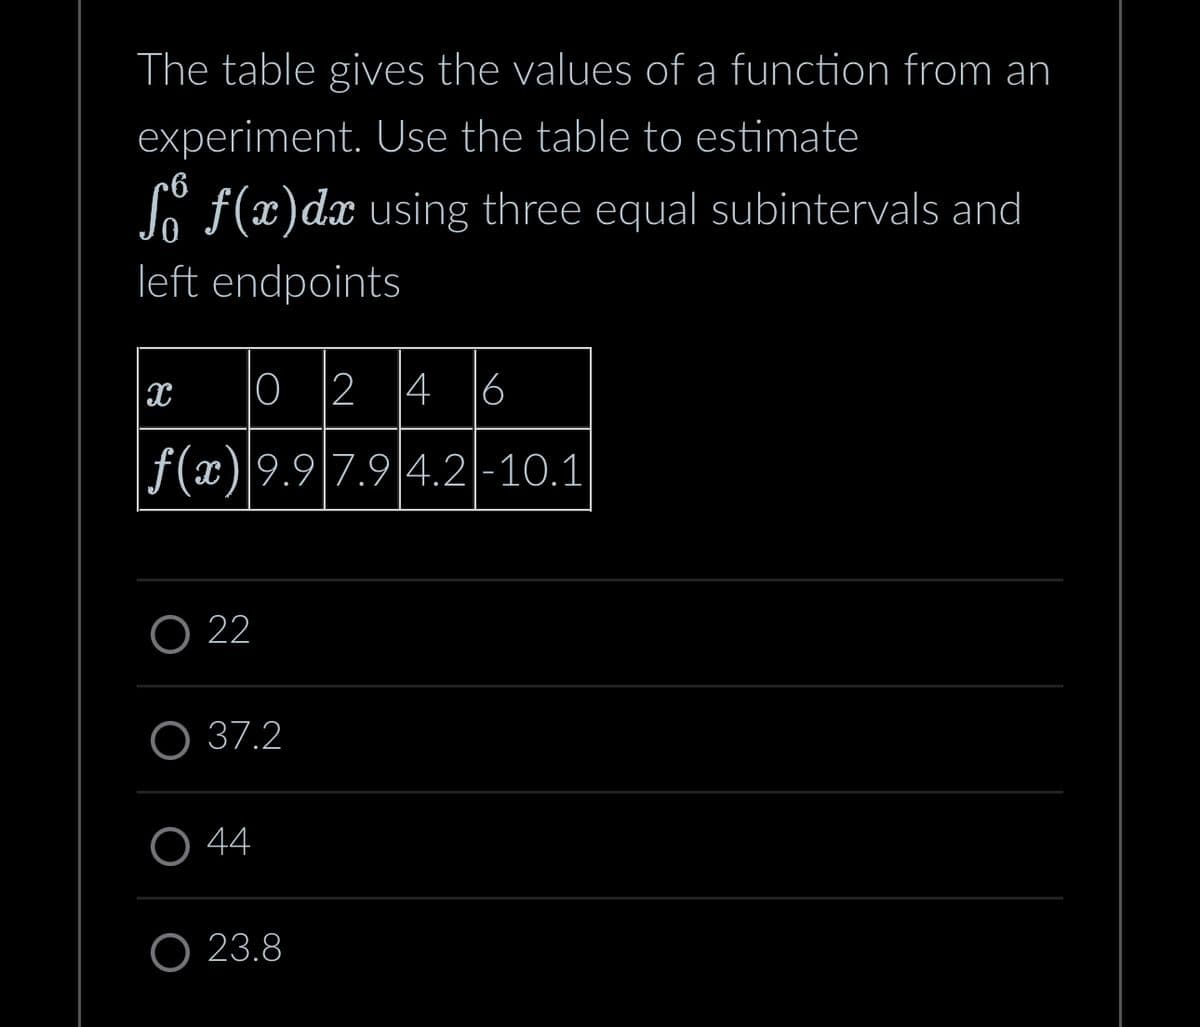 The table gives the values of a function from an
experiment. Use the table to estimate
So f(x) dx using three equal subintervals and
left endpoints
|0|2
2 4 6
f(x) 9.97.9 4.2-10.1
X
O 22
37.2
O 44
23.8